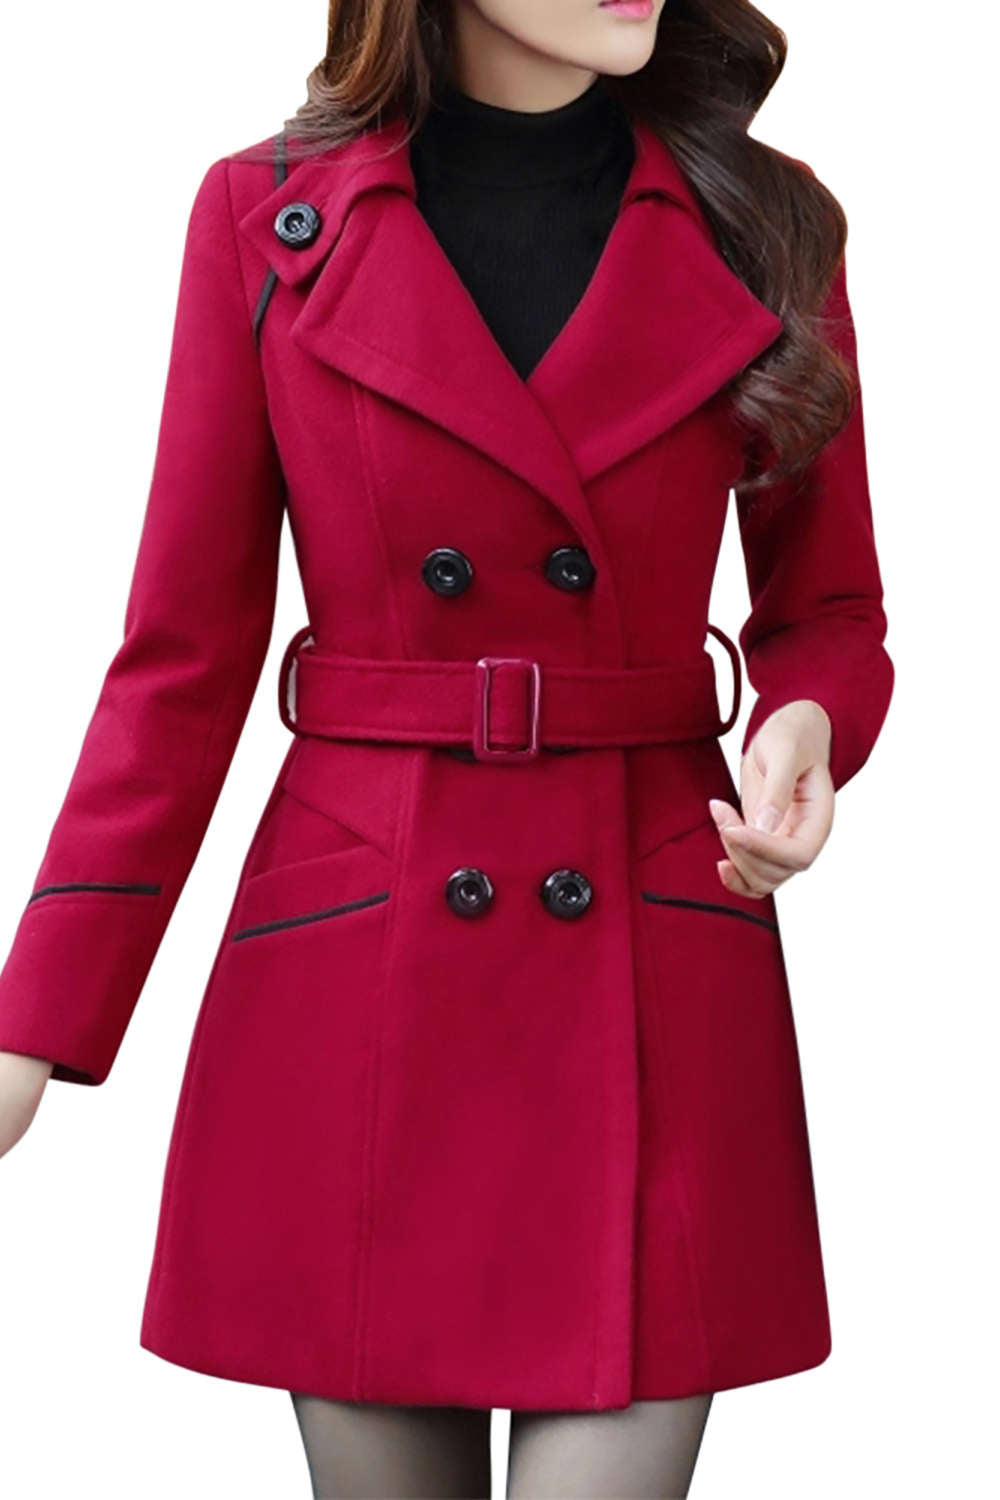 Iyasson Women's Double Breasted Blend Coat